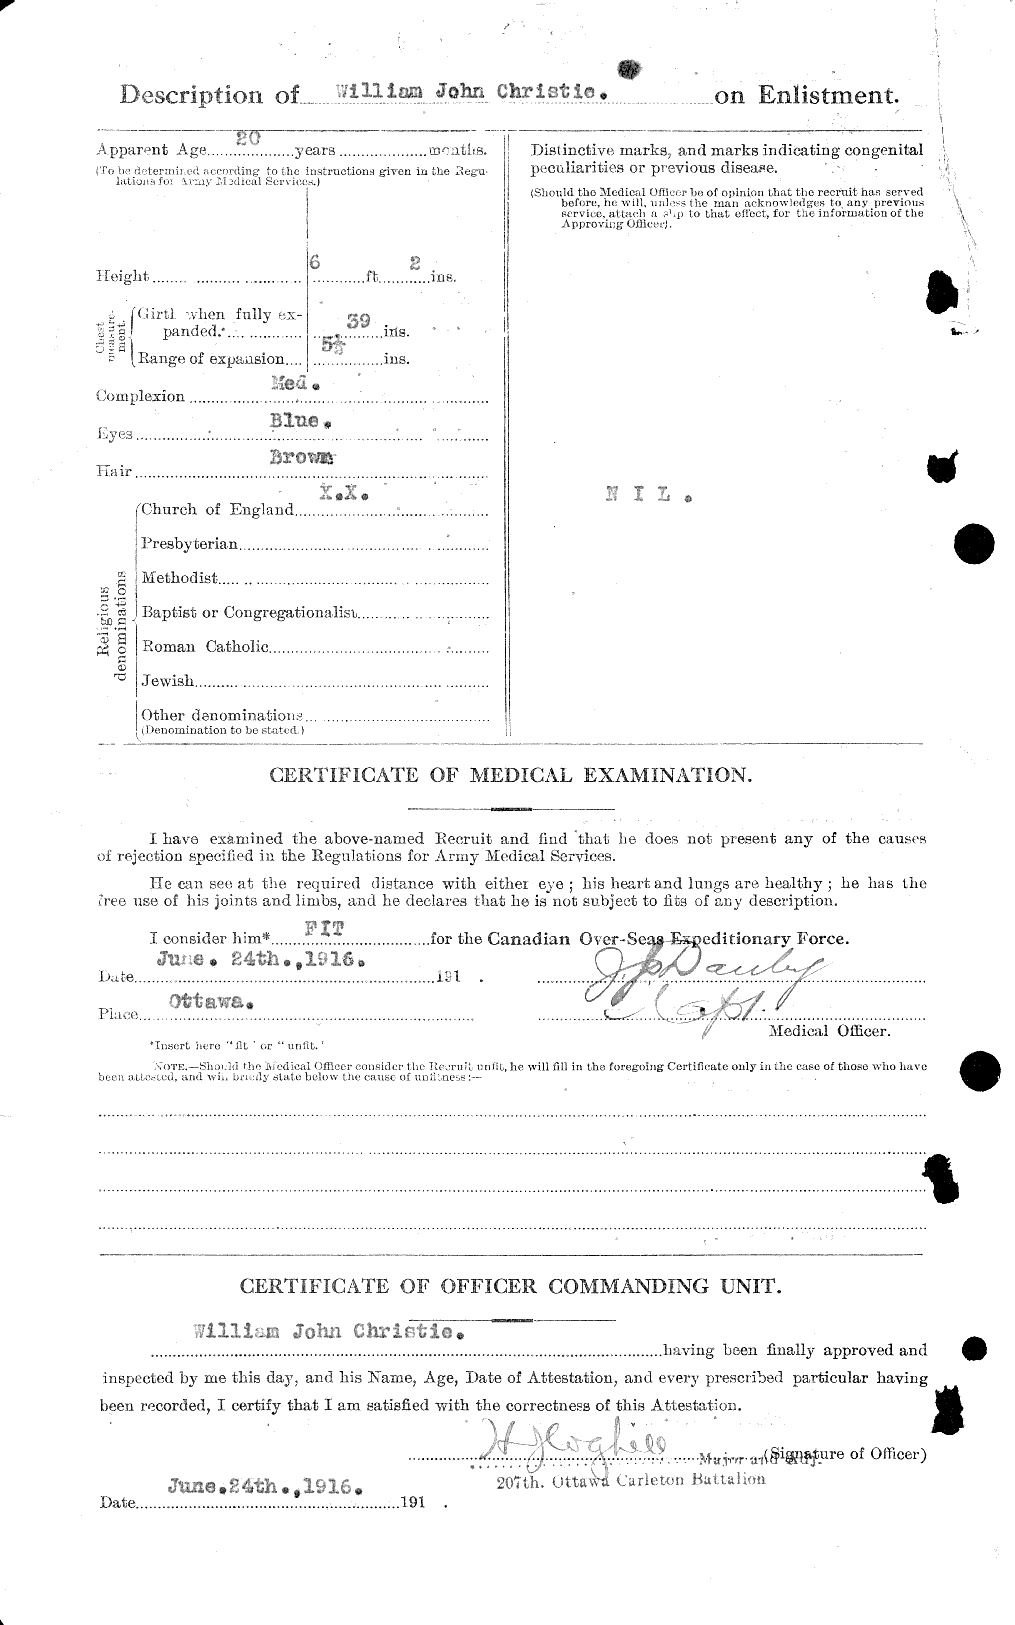 Personnel Records of the First World War - CEF 022101b